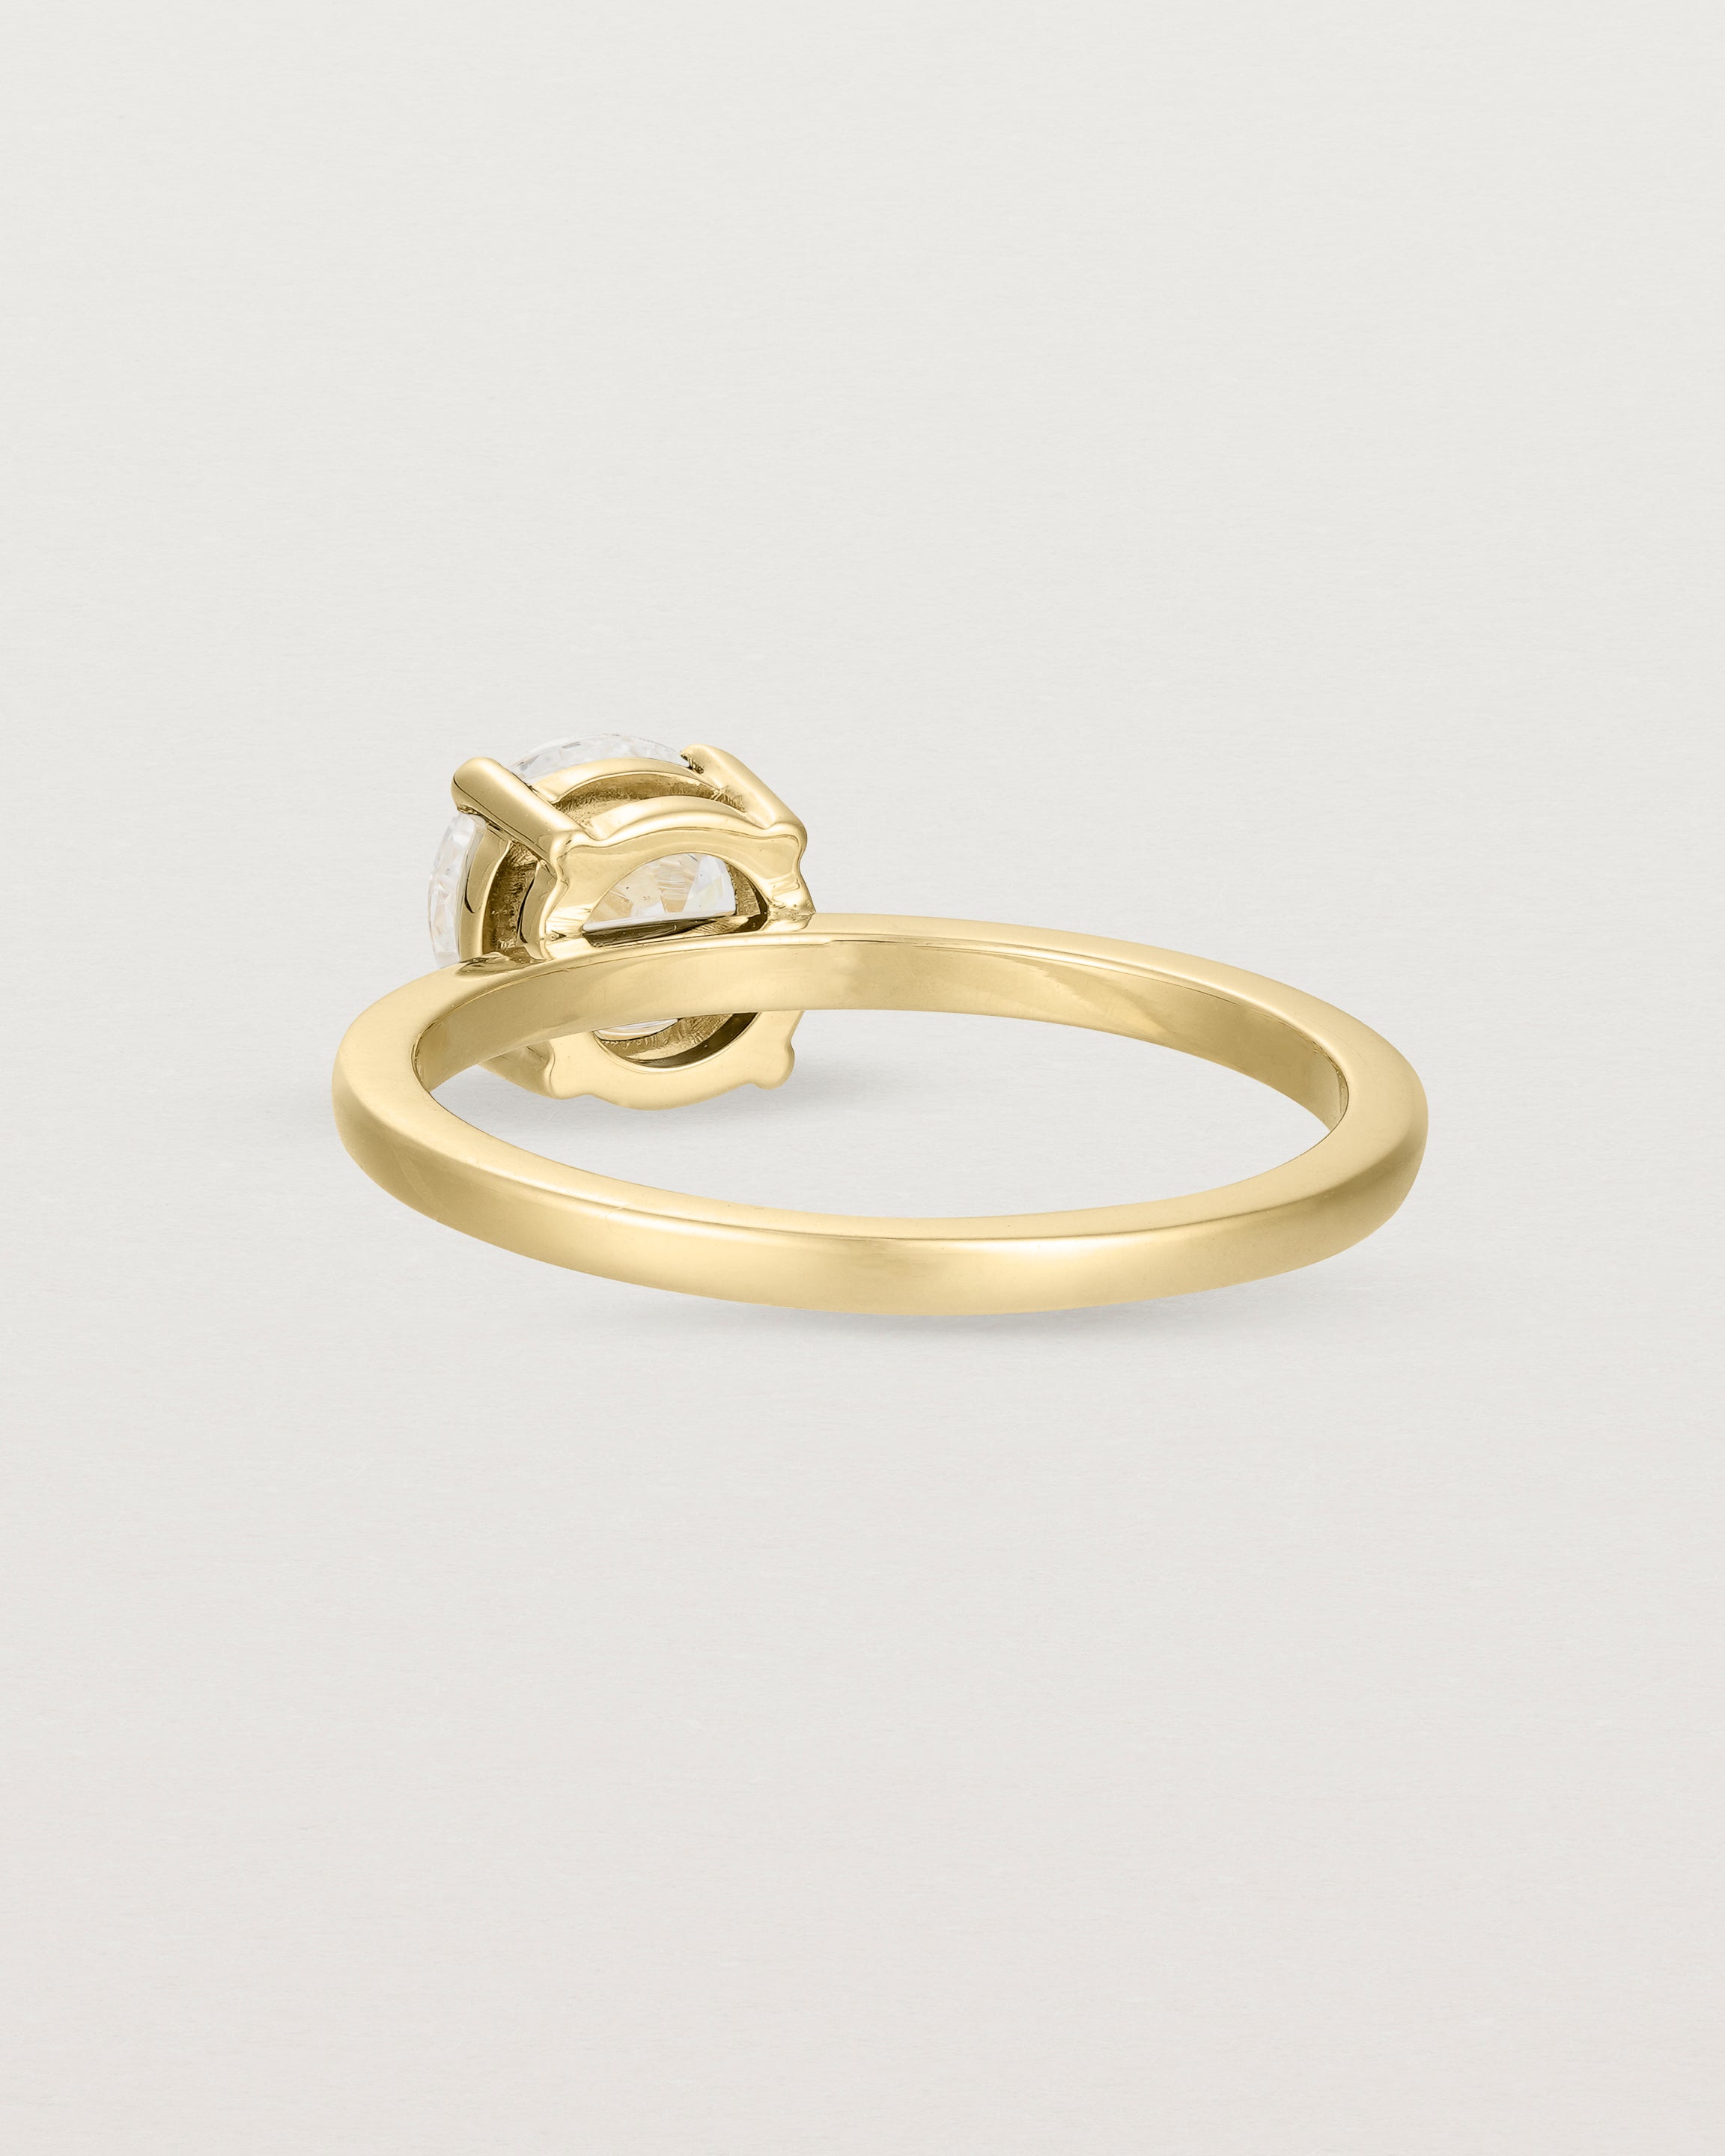 Back view of the Petite Una Round Solitaire | Laboratory Grown Diamond | Yellow Gold.